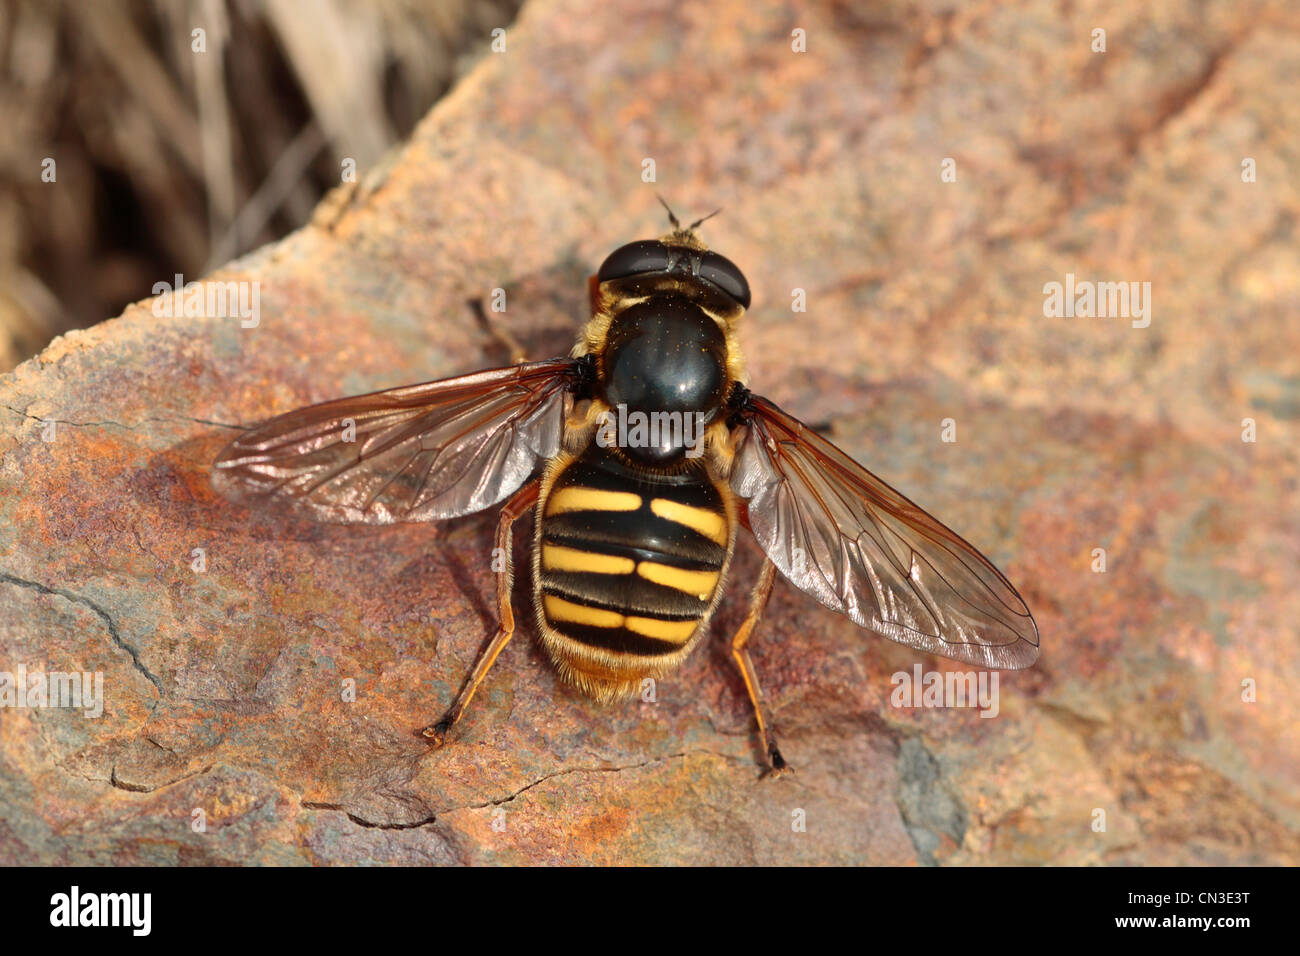 Hoverfly Sericoma silentis female basking on a rock. Powys, Wales. Stock Photo